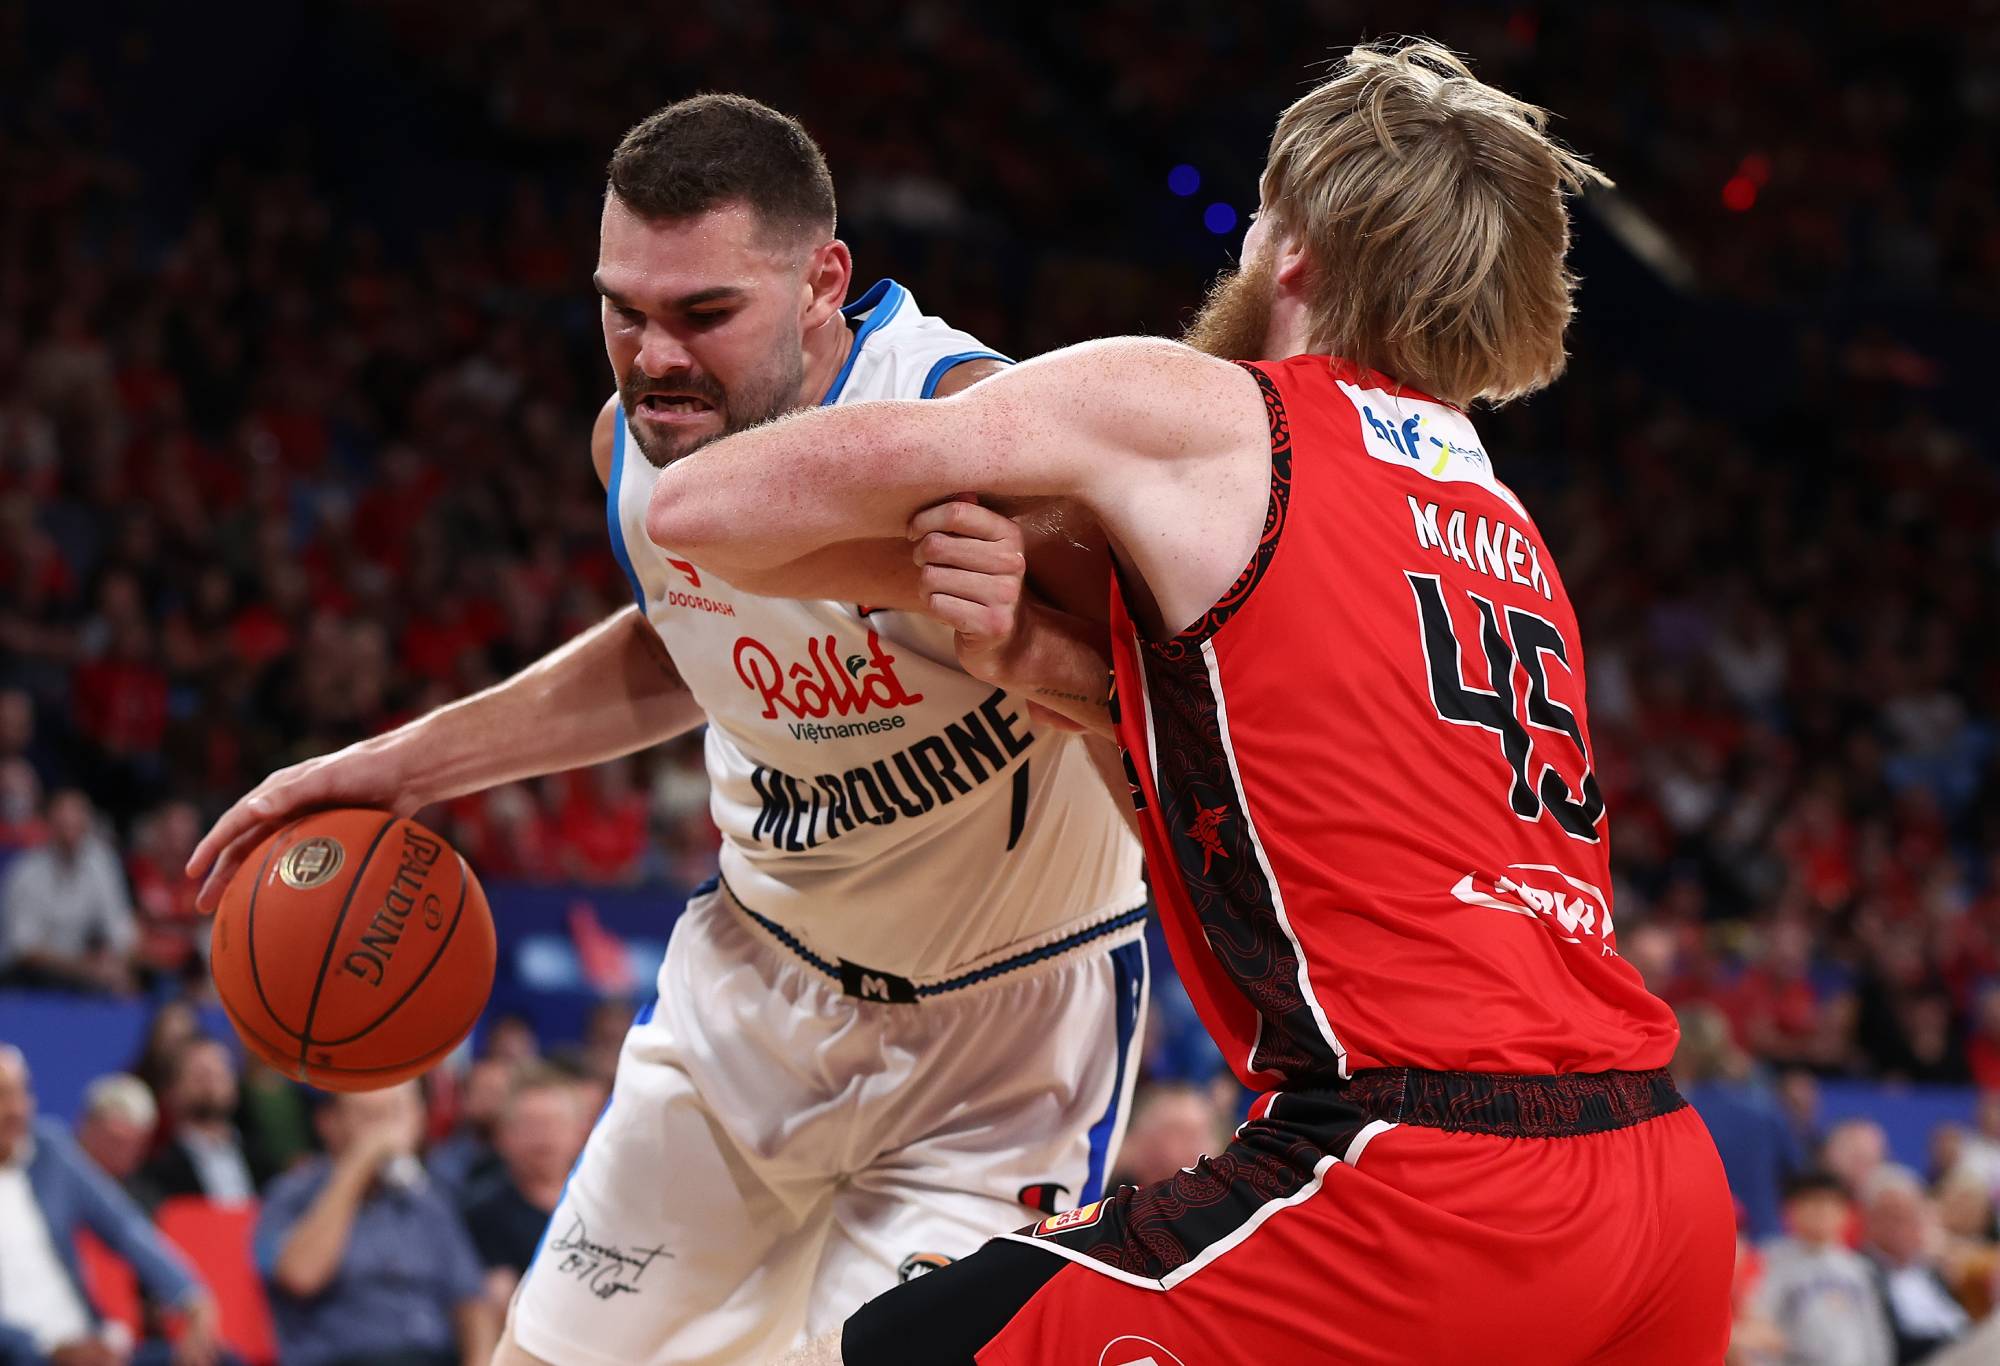 PERTH, AUSTRALIA - OCTOBER 14: Isaac Humphries of Melbourne United works to the basket against Brady Manek of the Wildcats during the round three NBL match between the Perth Wildcats and Melbourne United at RAC Arena, on October 14, 2022, in Perth, Australia. (Photo by Paul Kane/Getty Images)